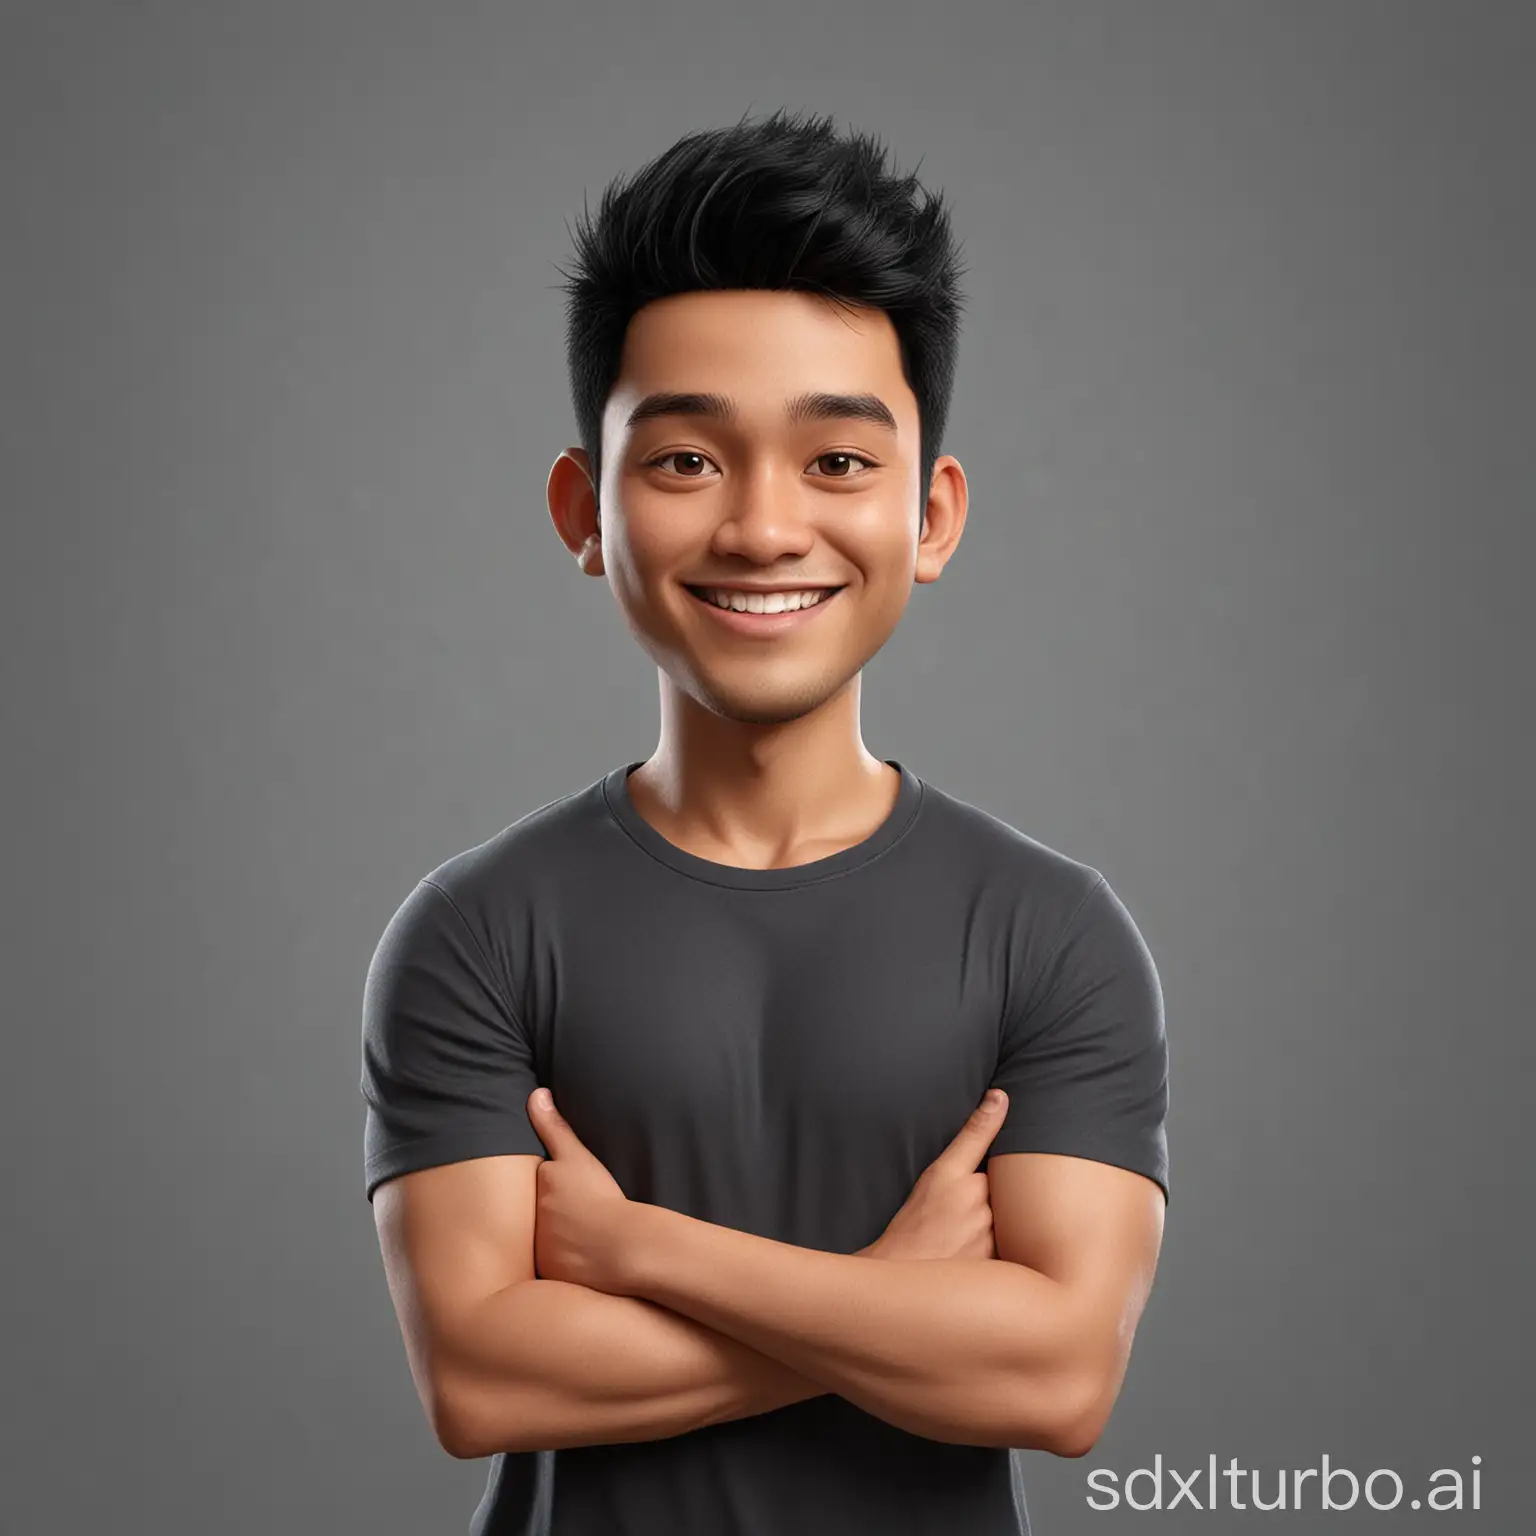 Hyperrealistic 3D Cartoon style character with big head. 24 year old Indonesian man, ideal body, black hair and black t-shirt. smiling at the camera with his arms in a ready position, gray background. Use soft photography lighting. Hair lighting, top lighting, side lighting, high quality photos, UHD, 16K